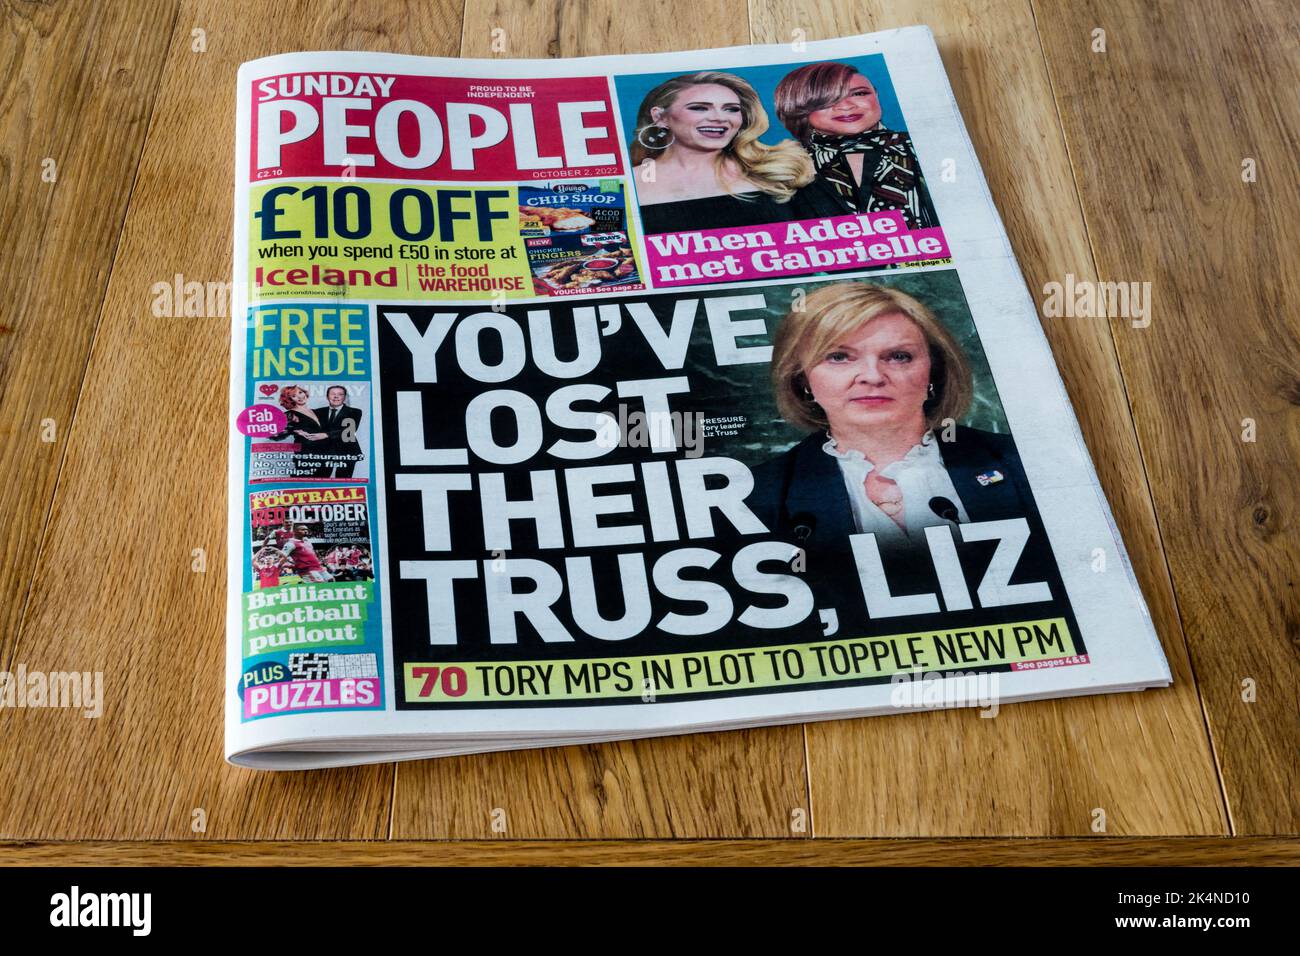 2 October 2022 Sunday People headline reads You've Lost Their Truss, Liz. Stock Photo